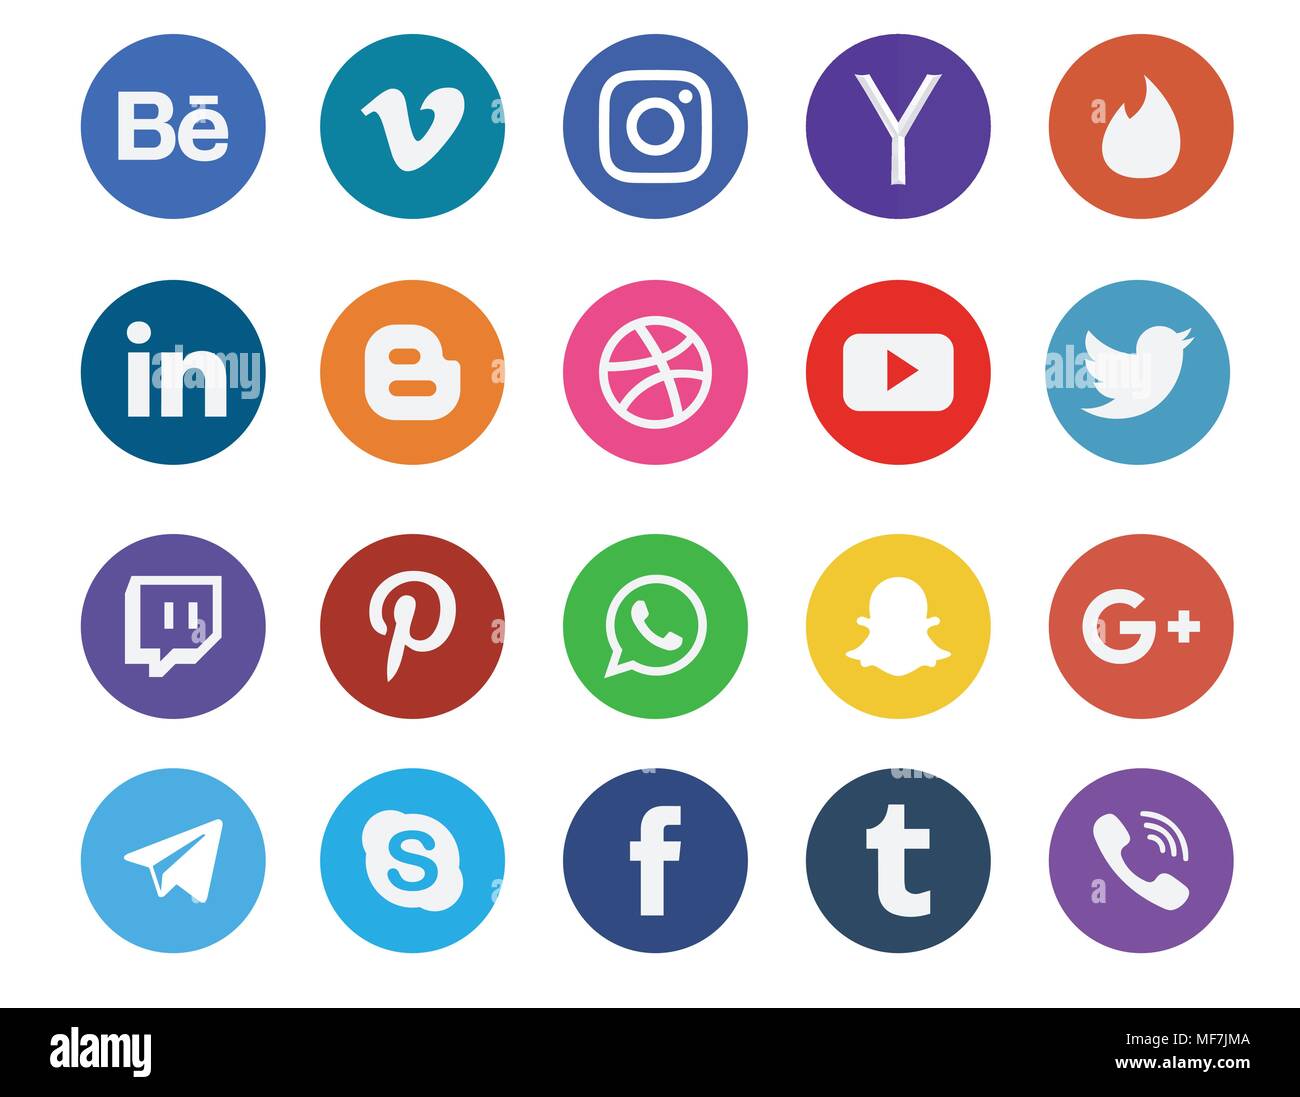 Social media icon collection with different types of web button icon set Stock Vector